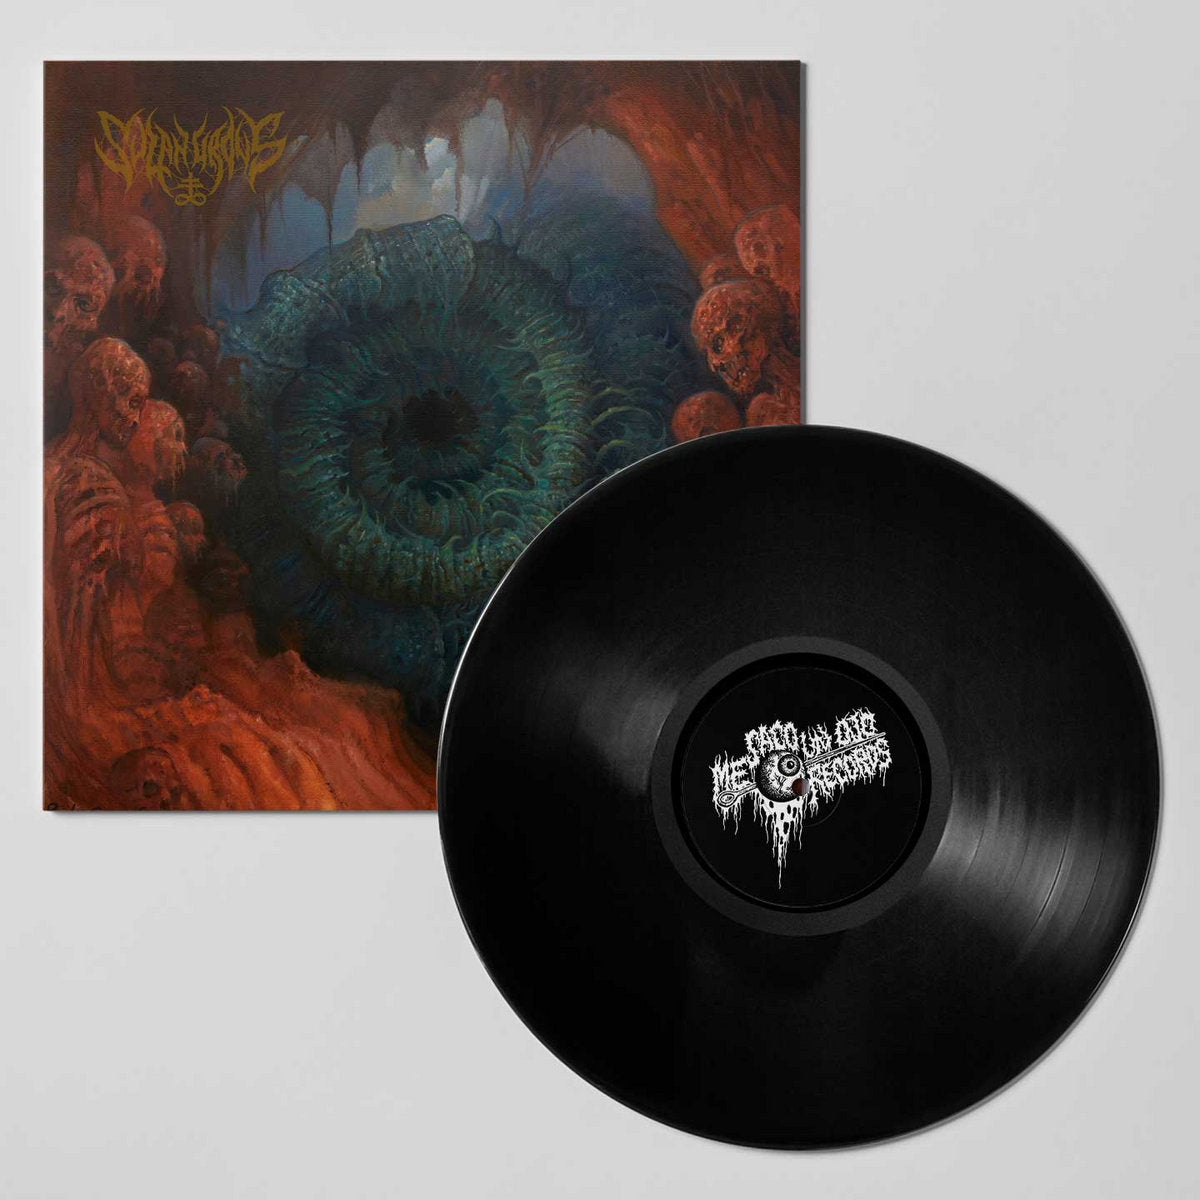 SULPHUROUS – The Black Mouth of Sephulcre LP